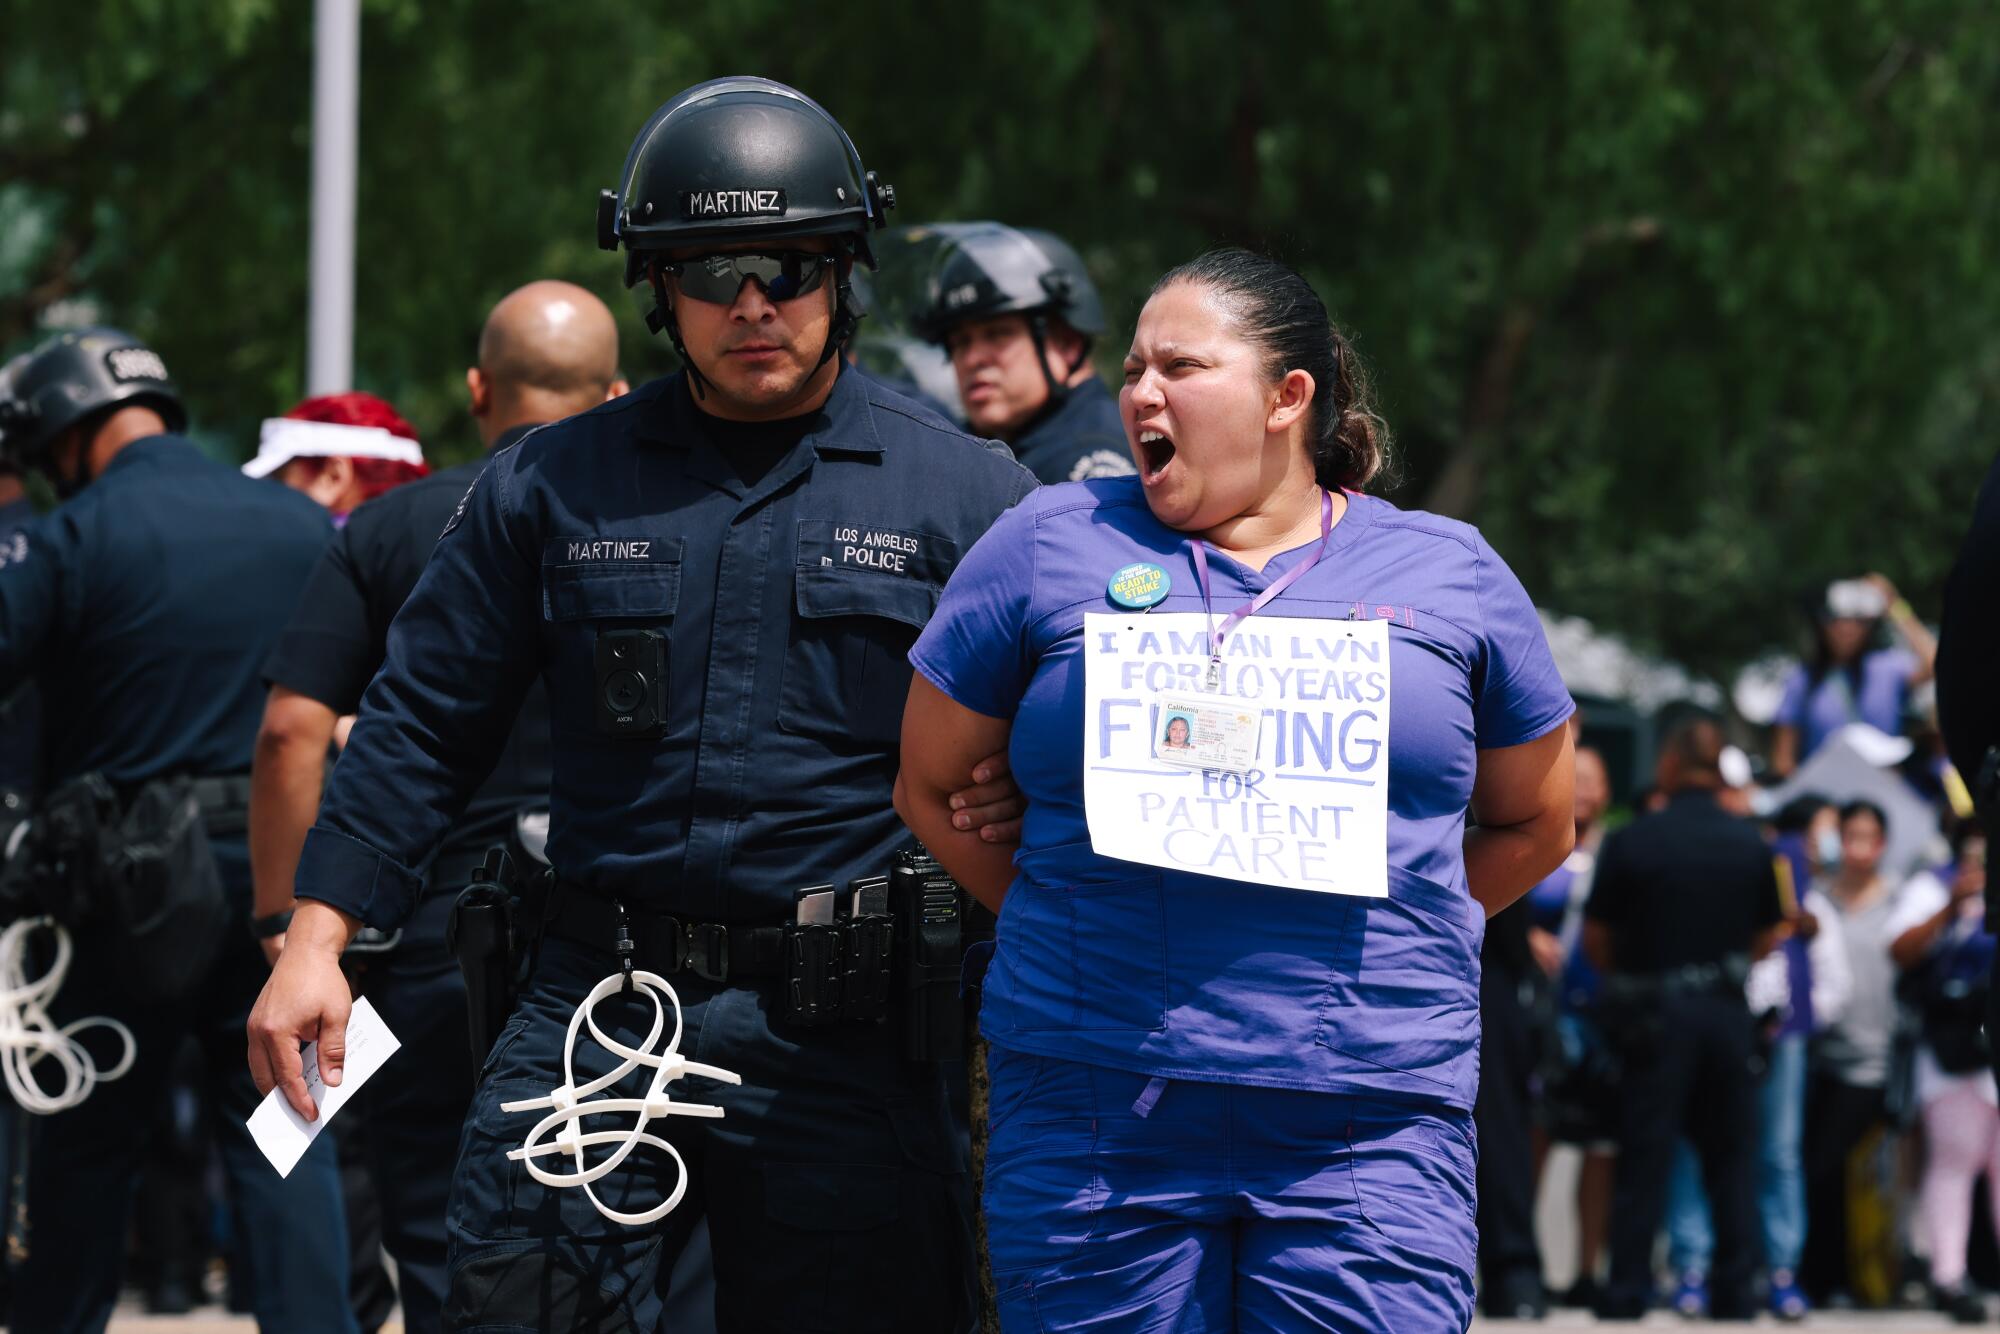 A police officer makes an arrest during a demonstration by thousands of healthcare workers.